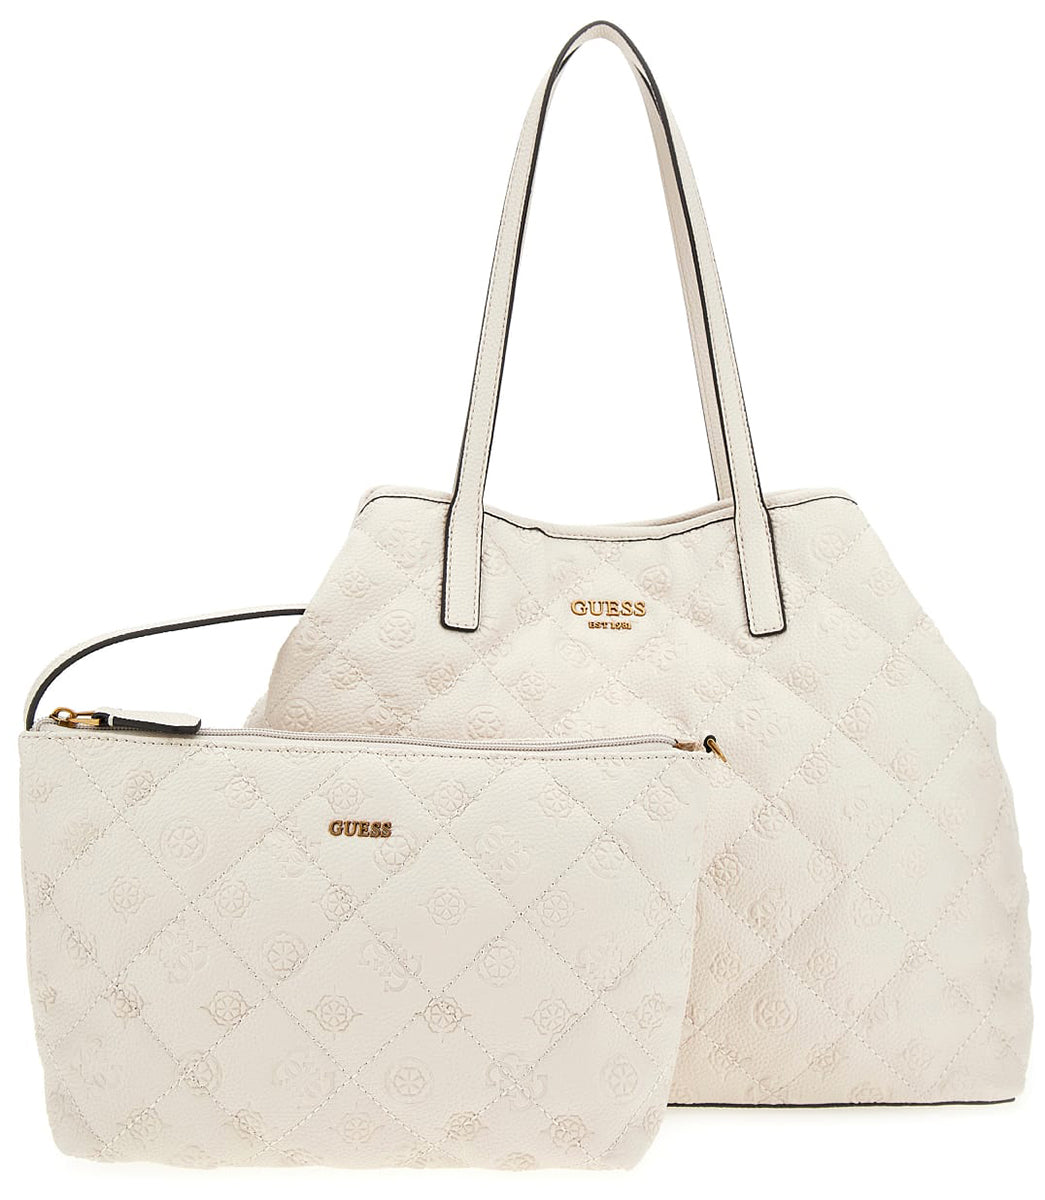 Damenhandtasche von Guess Vikky Tote Peony Large Shopper in Stone